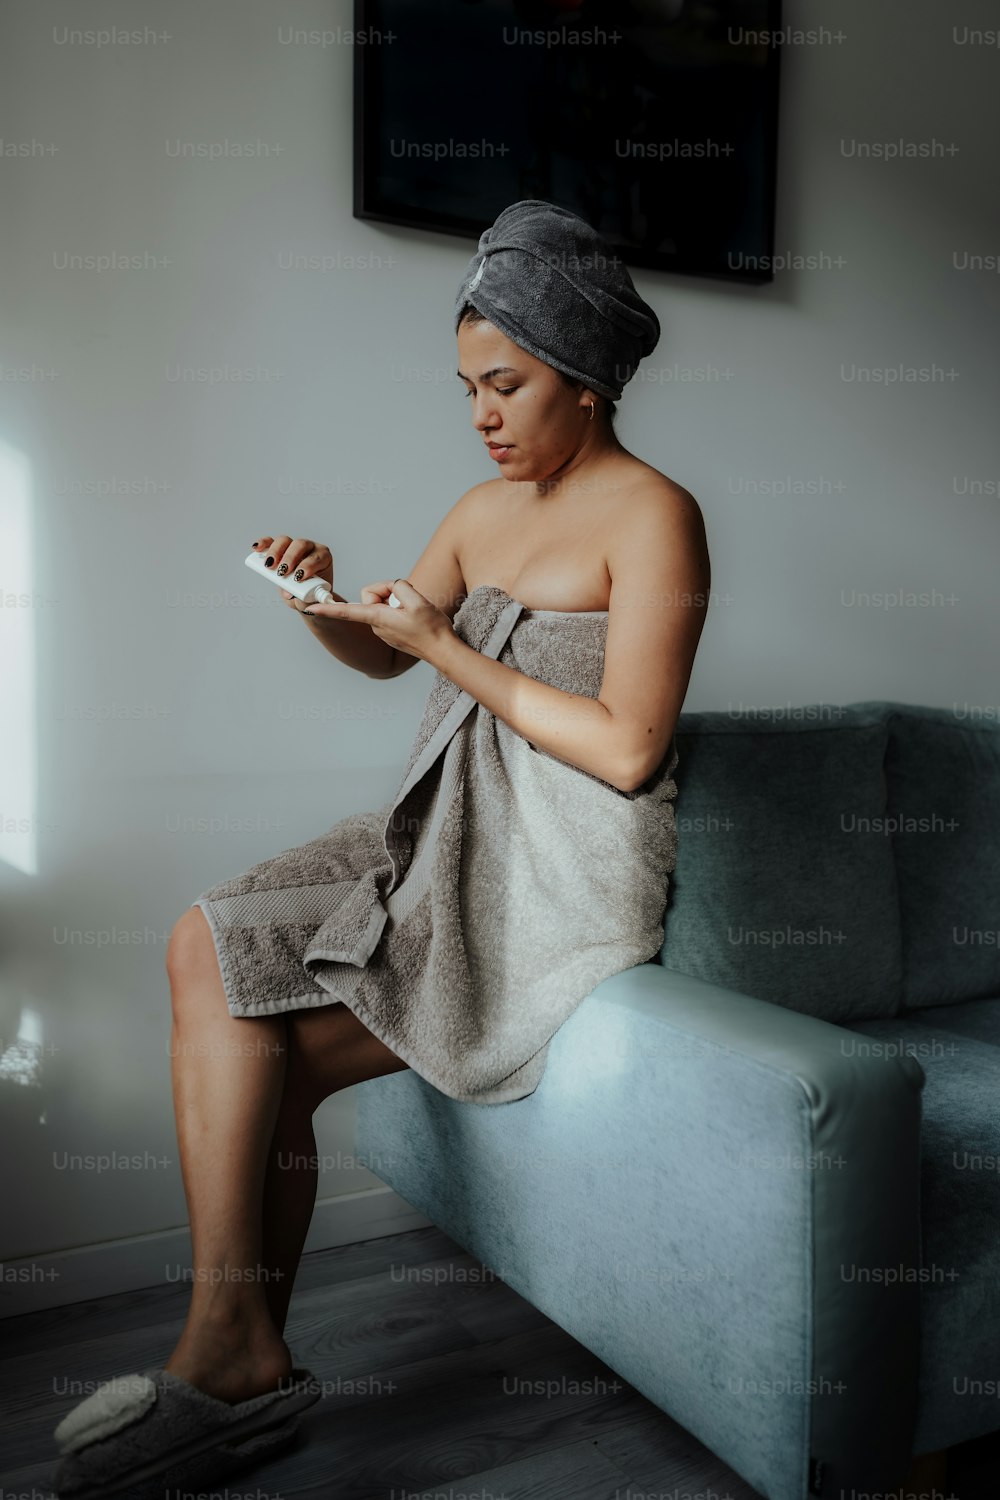 a woman in a towel sitting on a couch